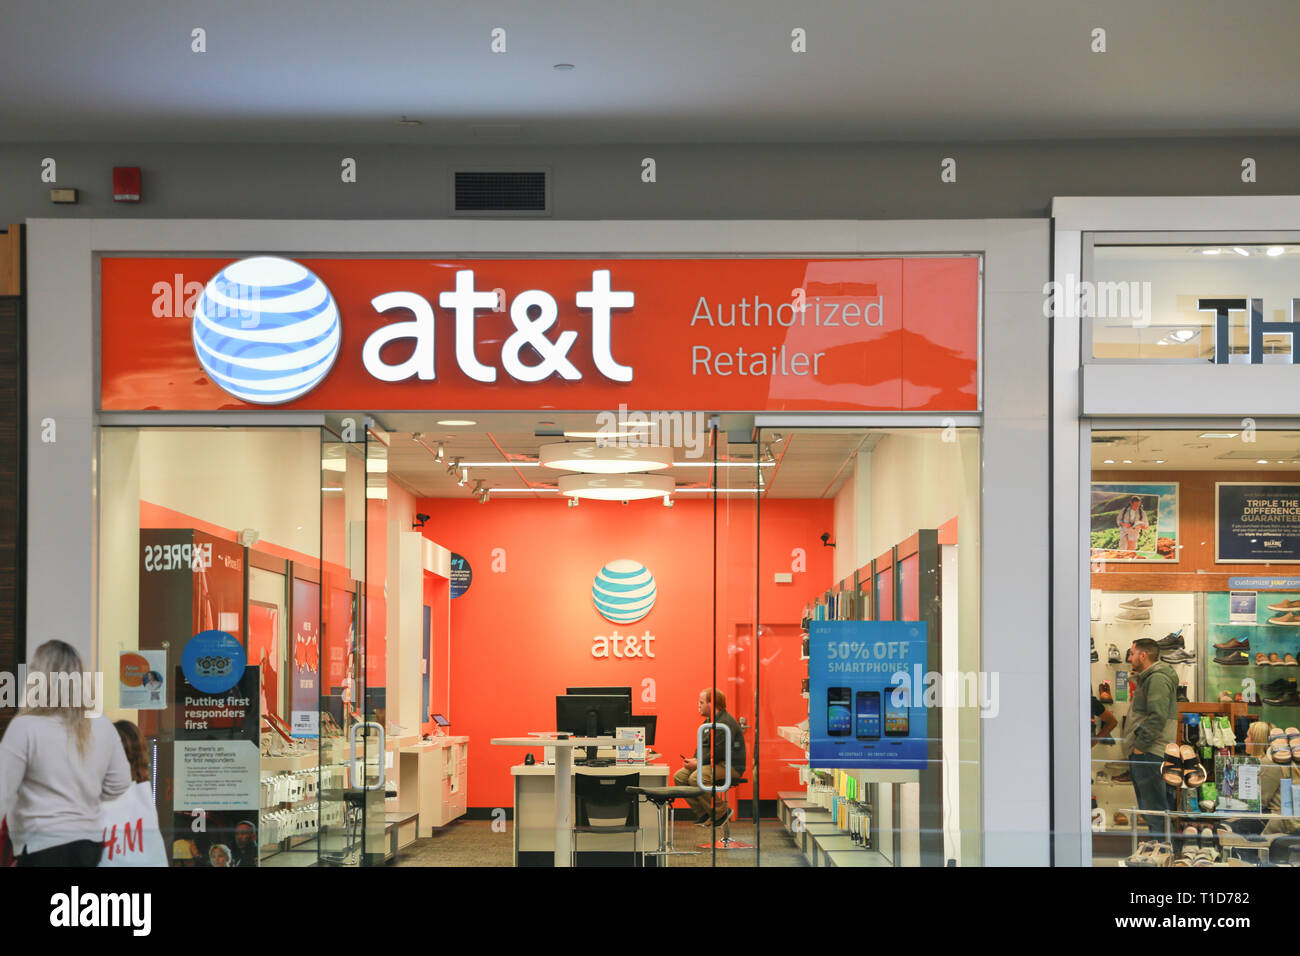 Lawrence Township New Jersey, February 24, 2019: AT&T Retail Store. AT&T Inc. is an American Telecommunications Corporation IX Stock Photo